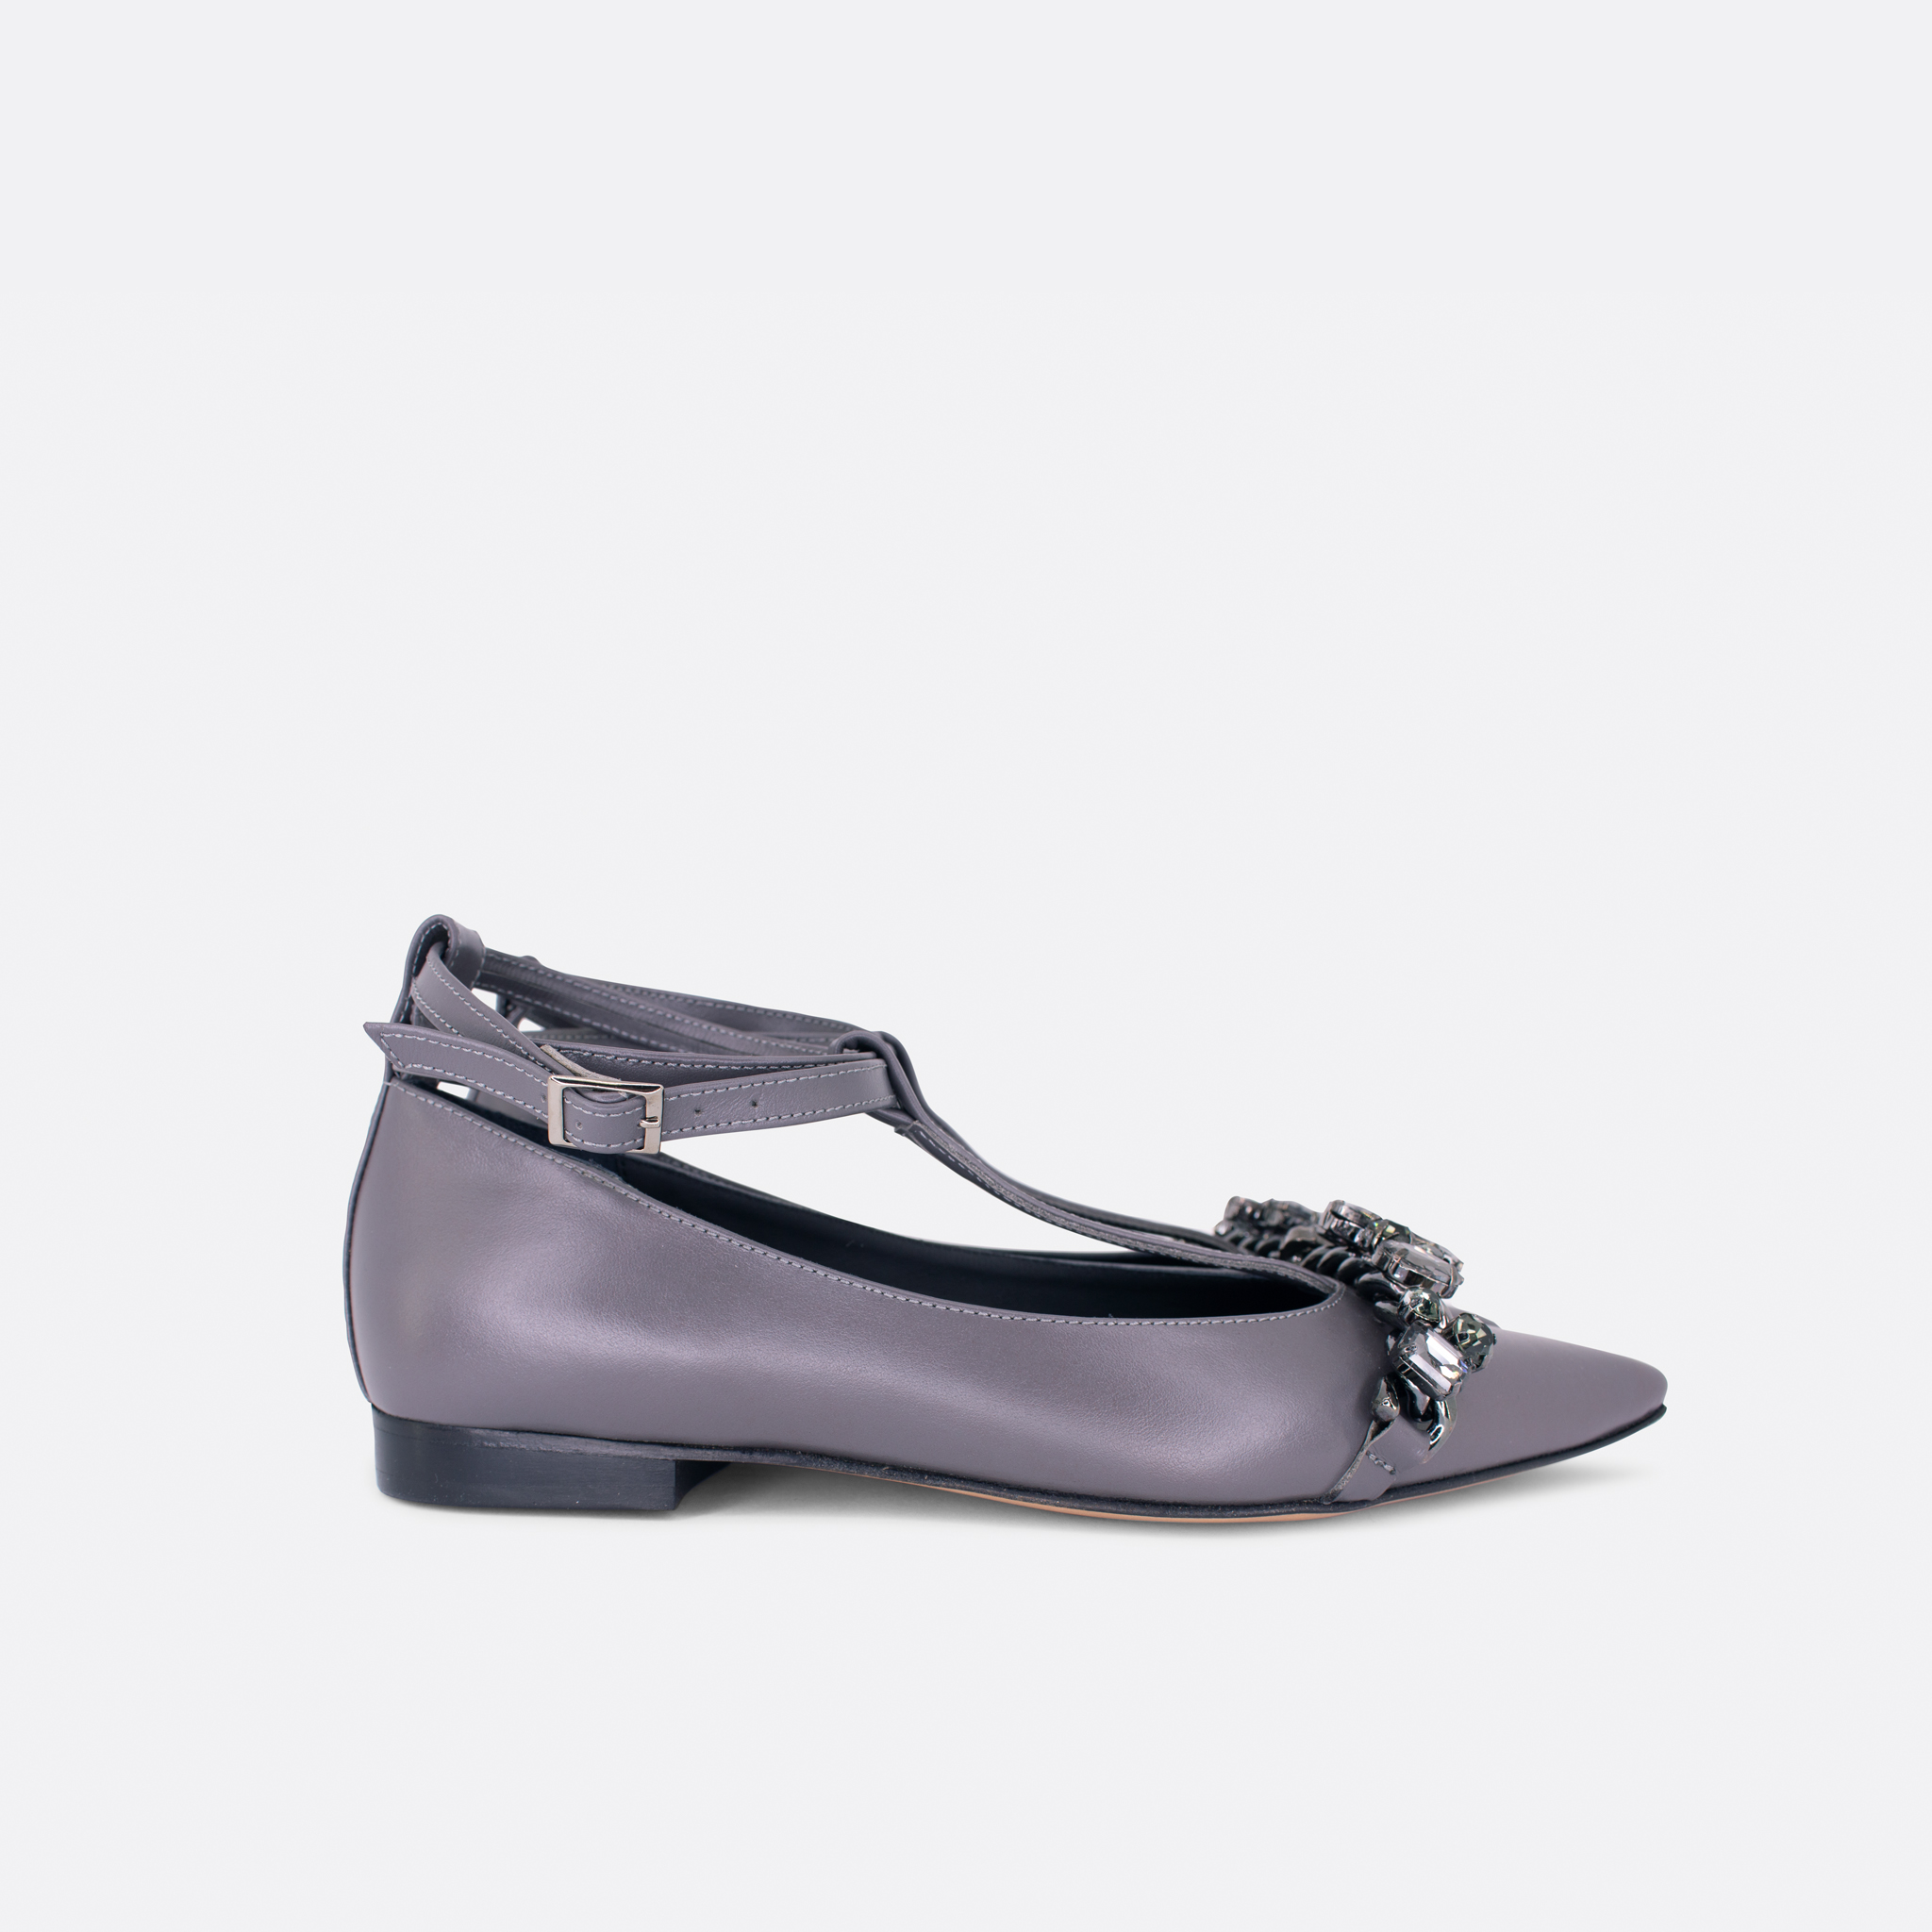 841 Sive 01 - Lilu shoes